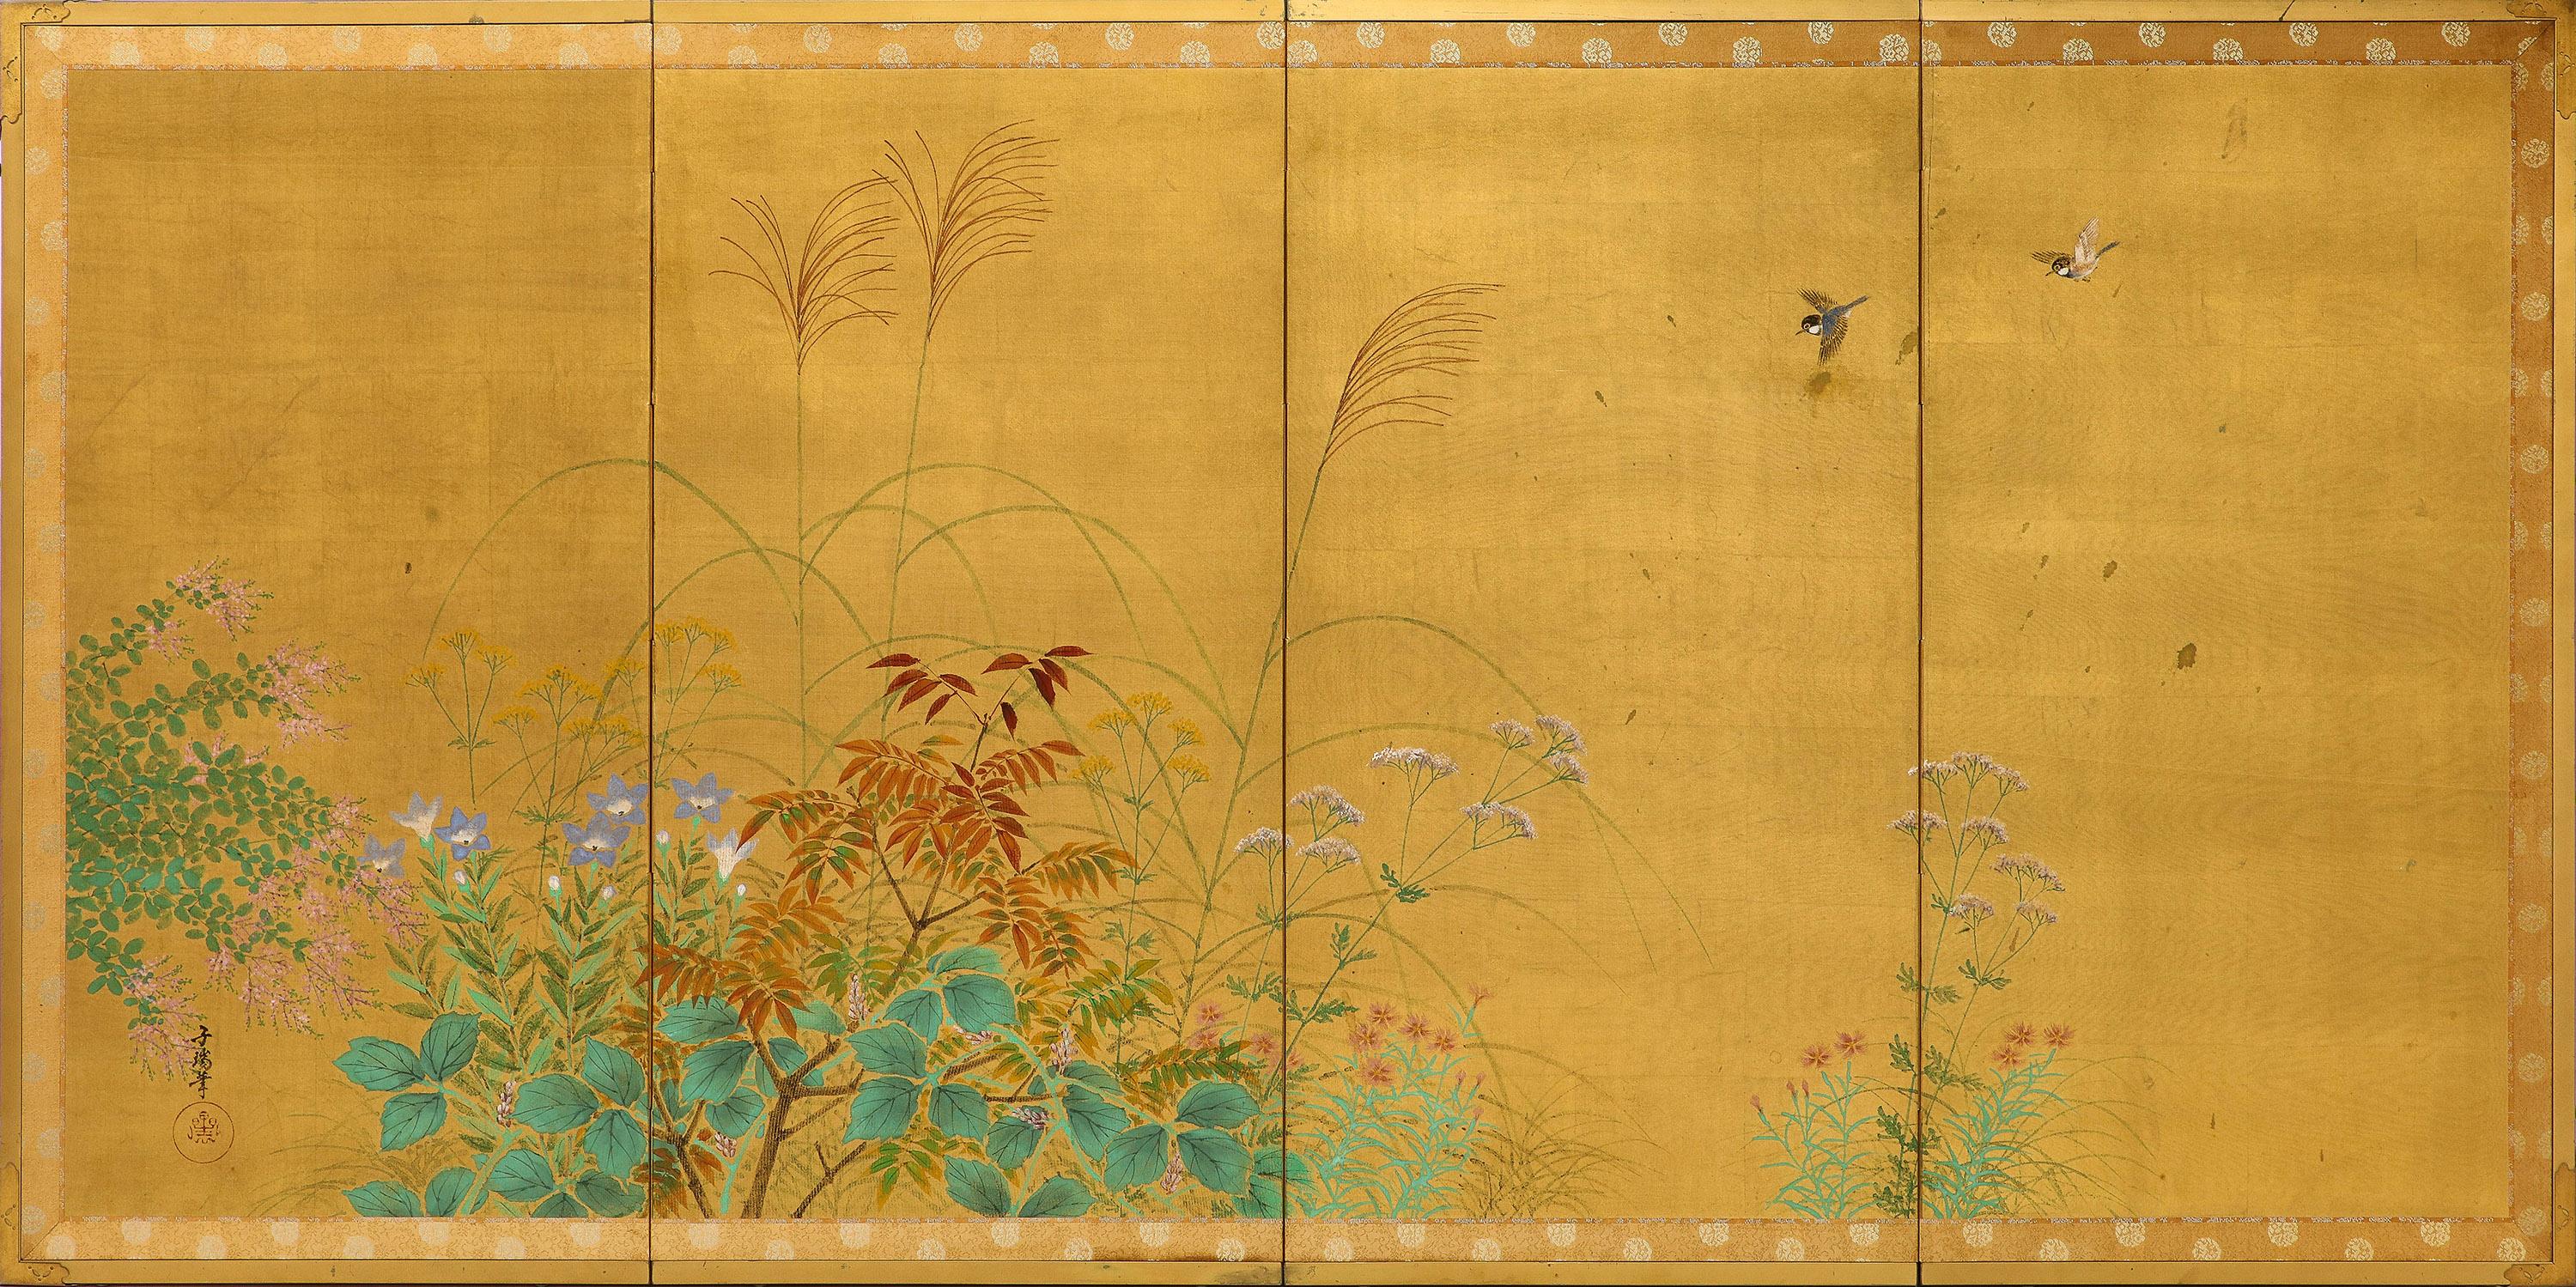 Showa period gouache and gold leaf Japanese screen. The 4 panels having original brass frame border and depicting a scene of foliage and birds.
This is finely executed example has been mounted on a panel so it can be hung on a wall.
Condition is